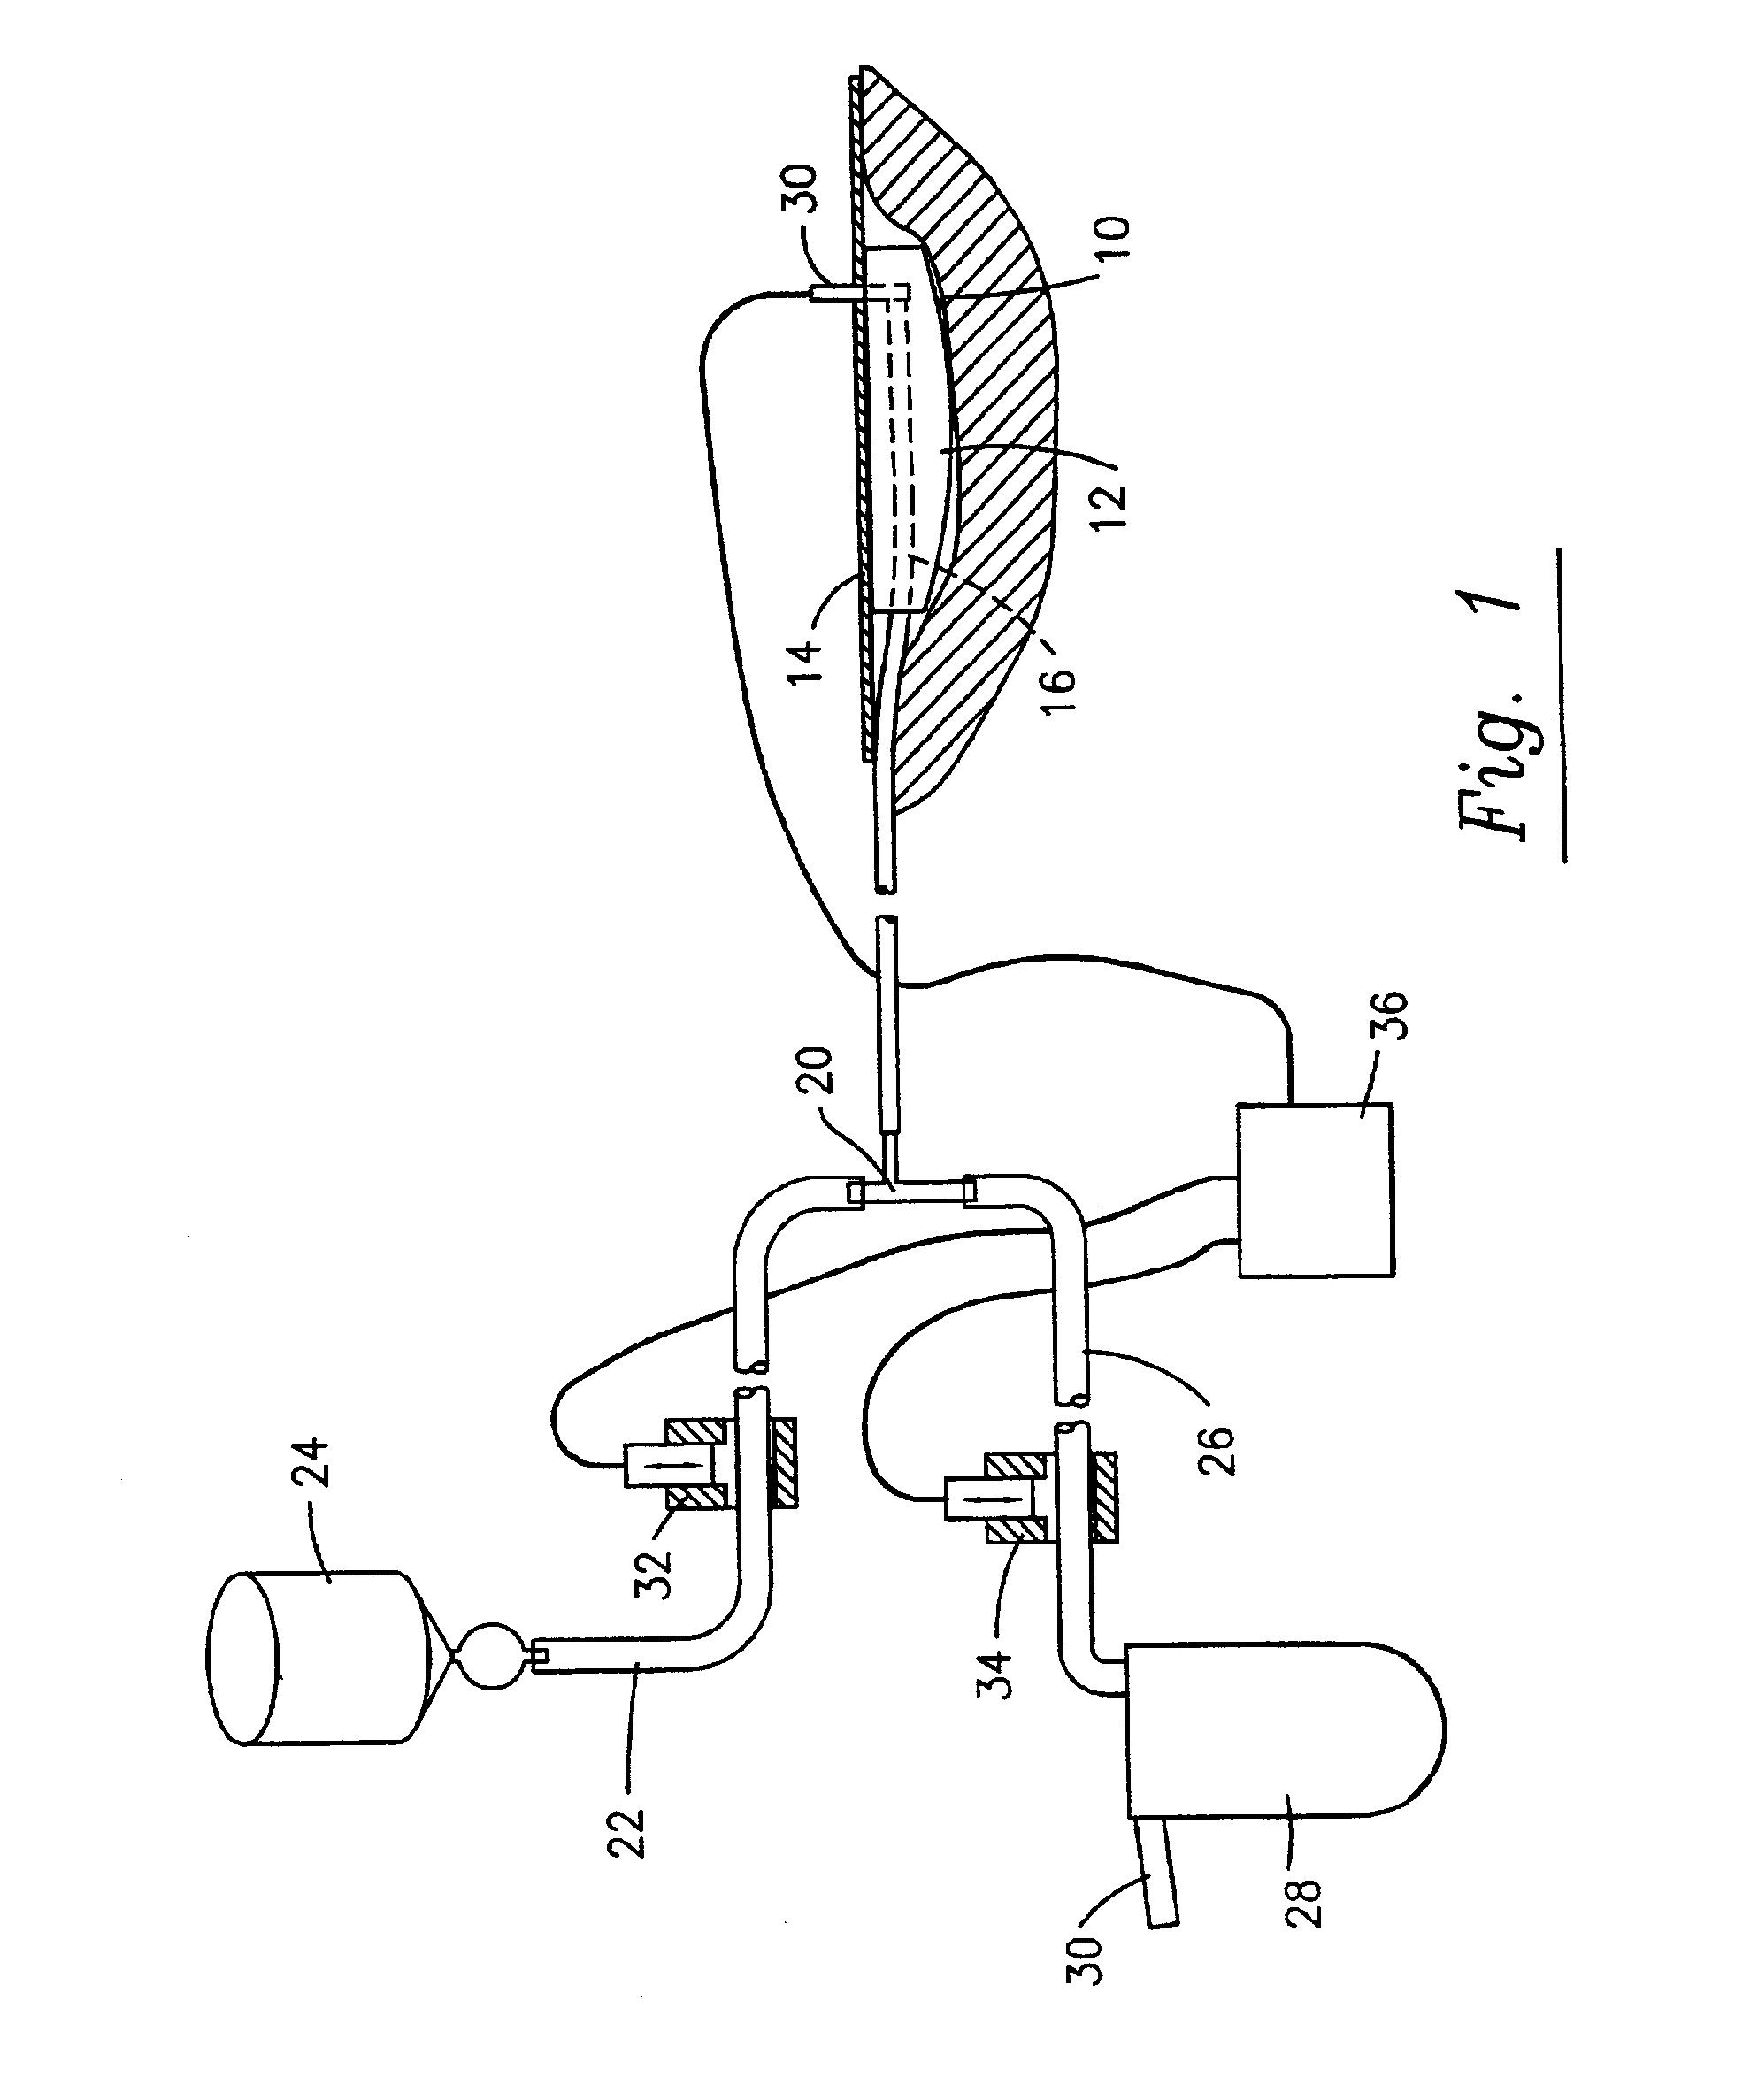 Process and device for application of active substances to a wound surface